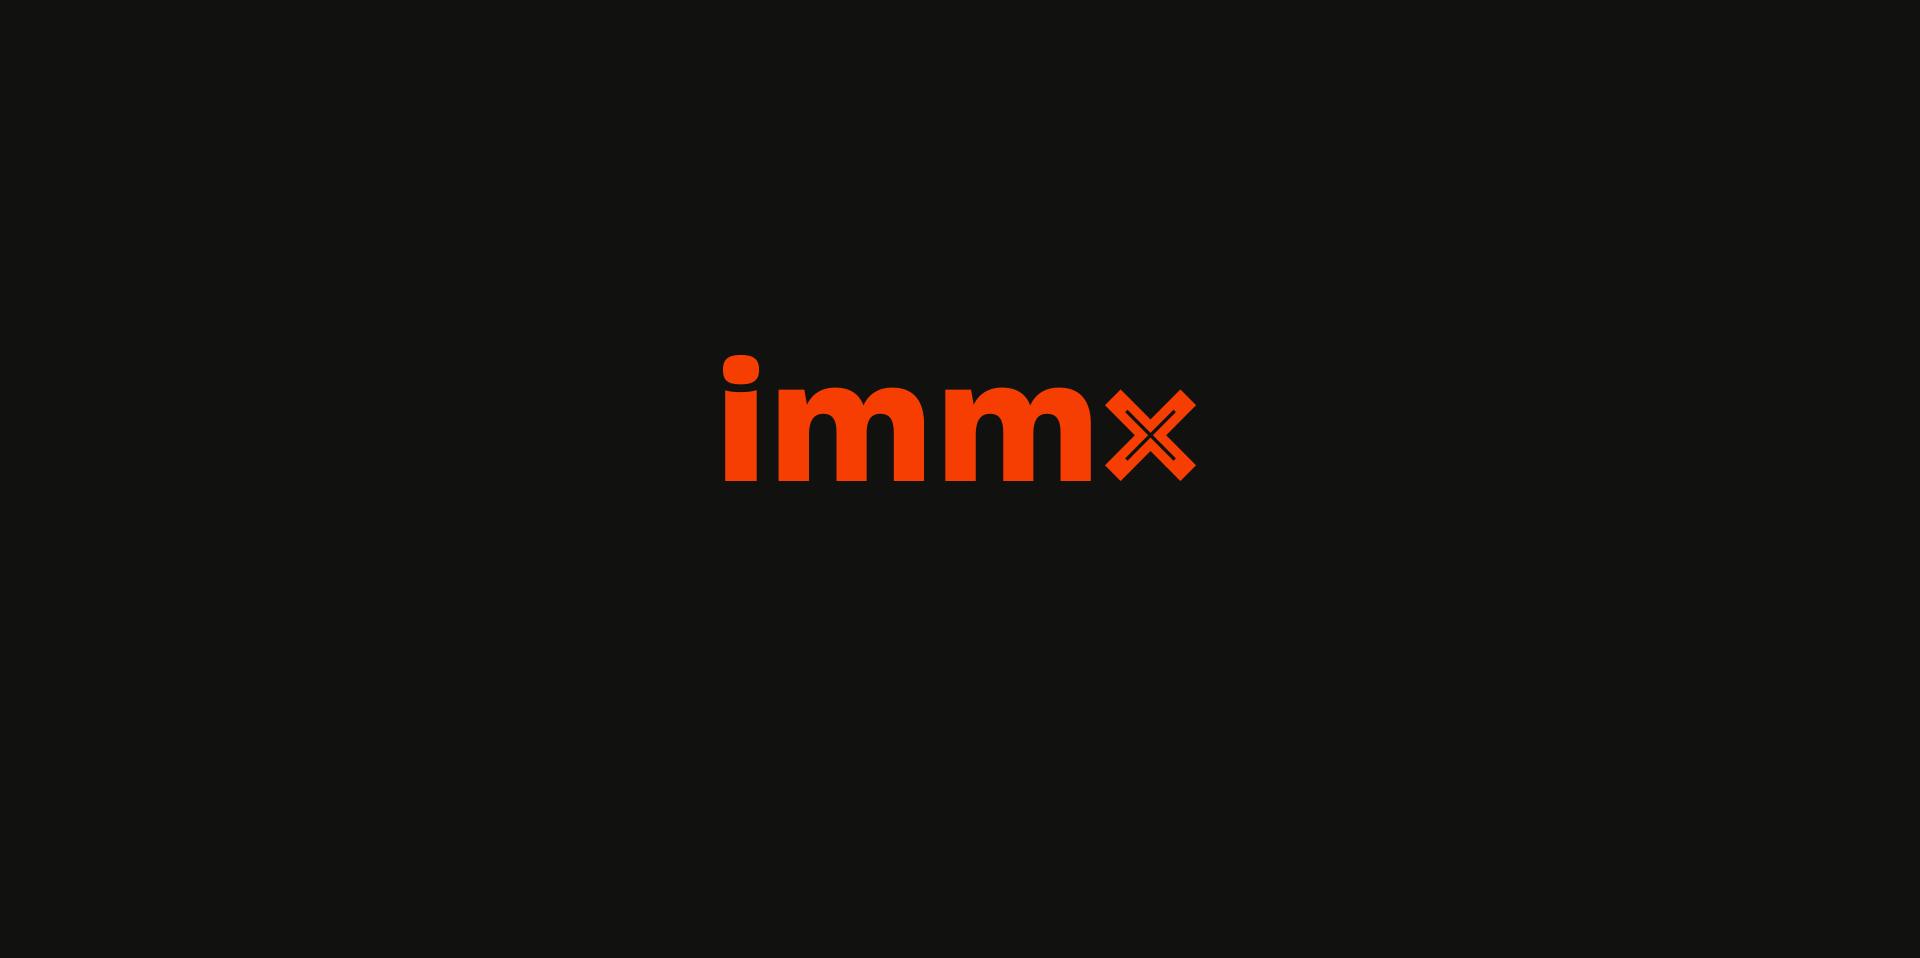 We are IMMX